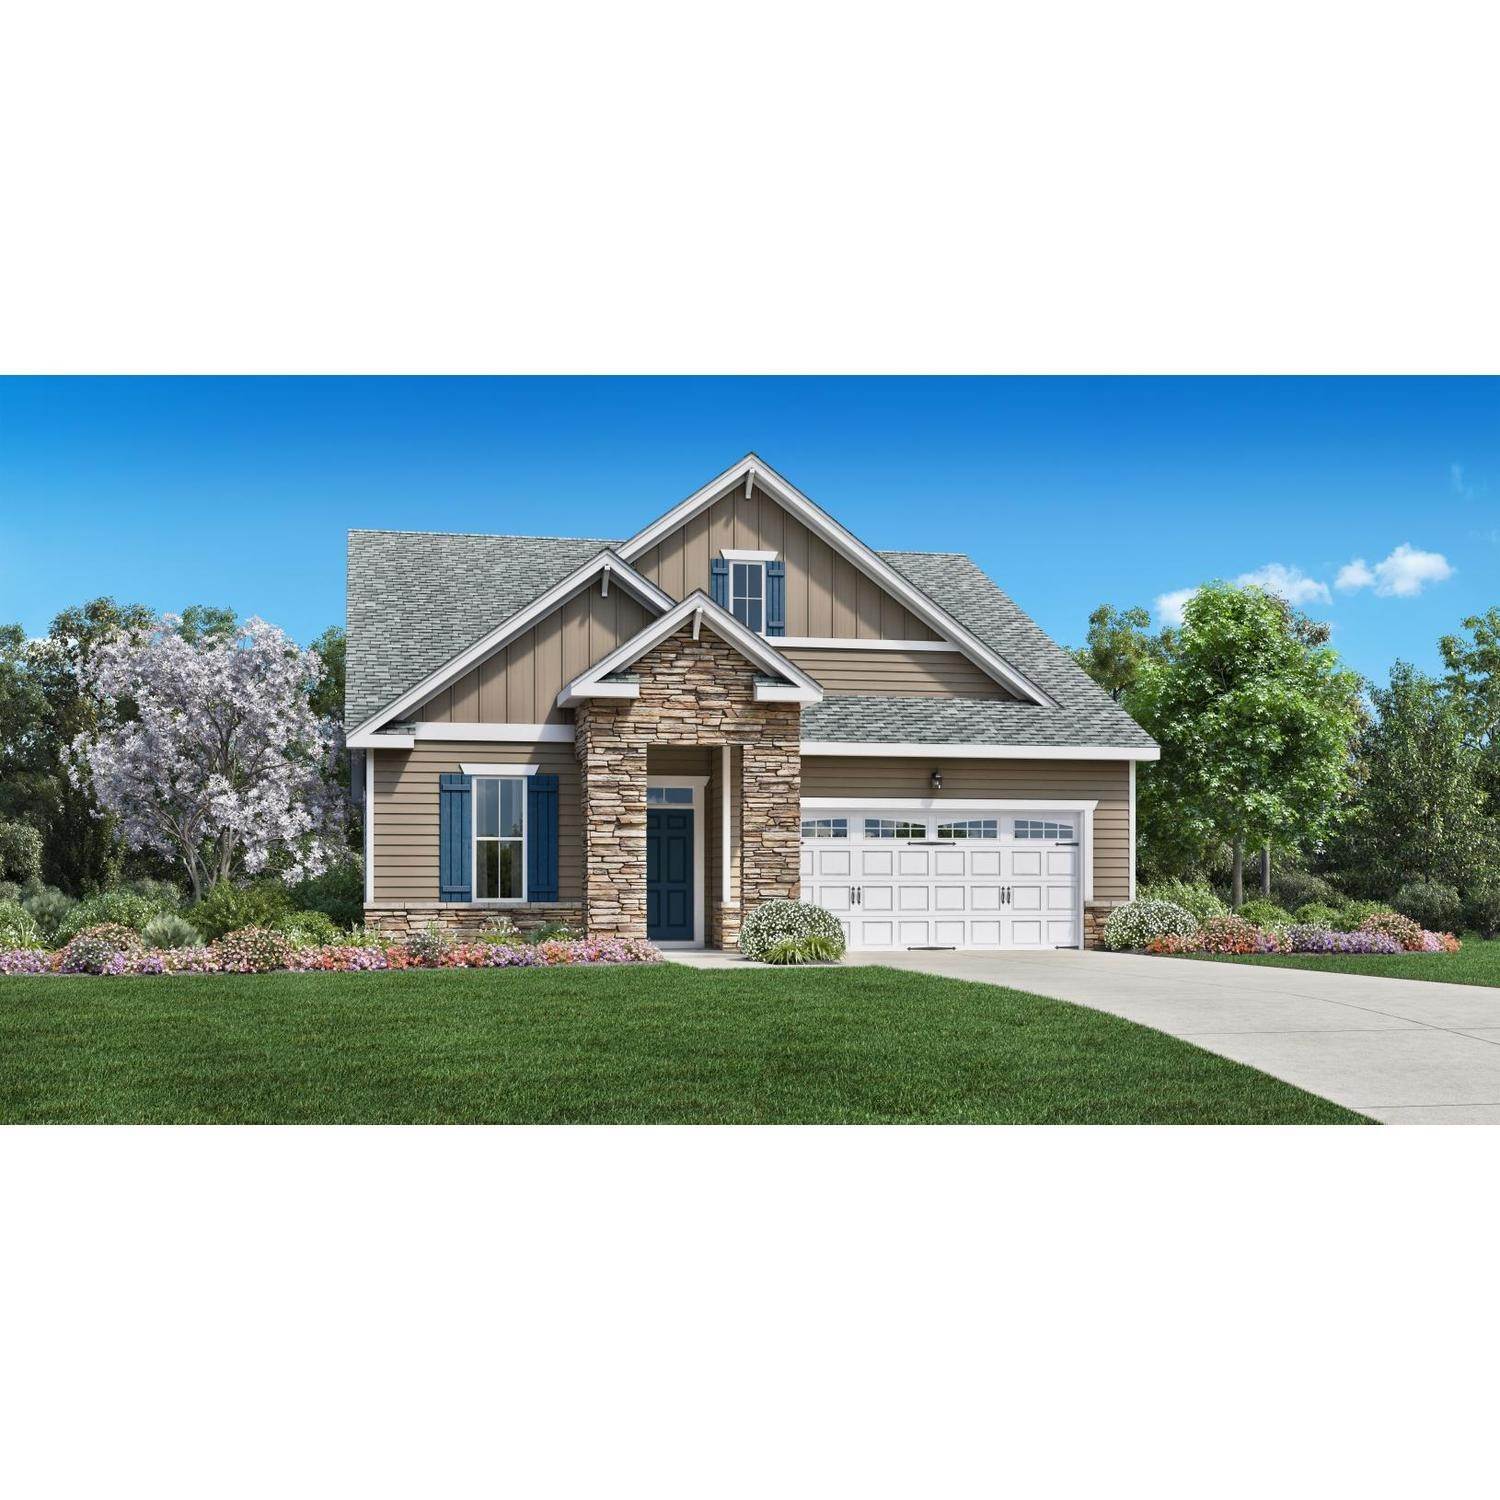 Single Family for Sale at Apex, NC 27502